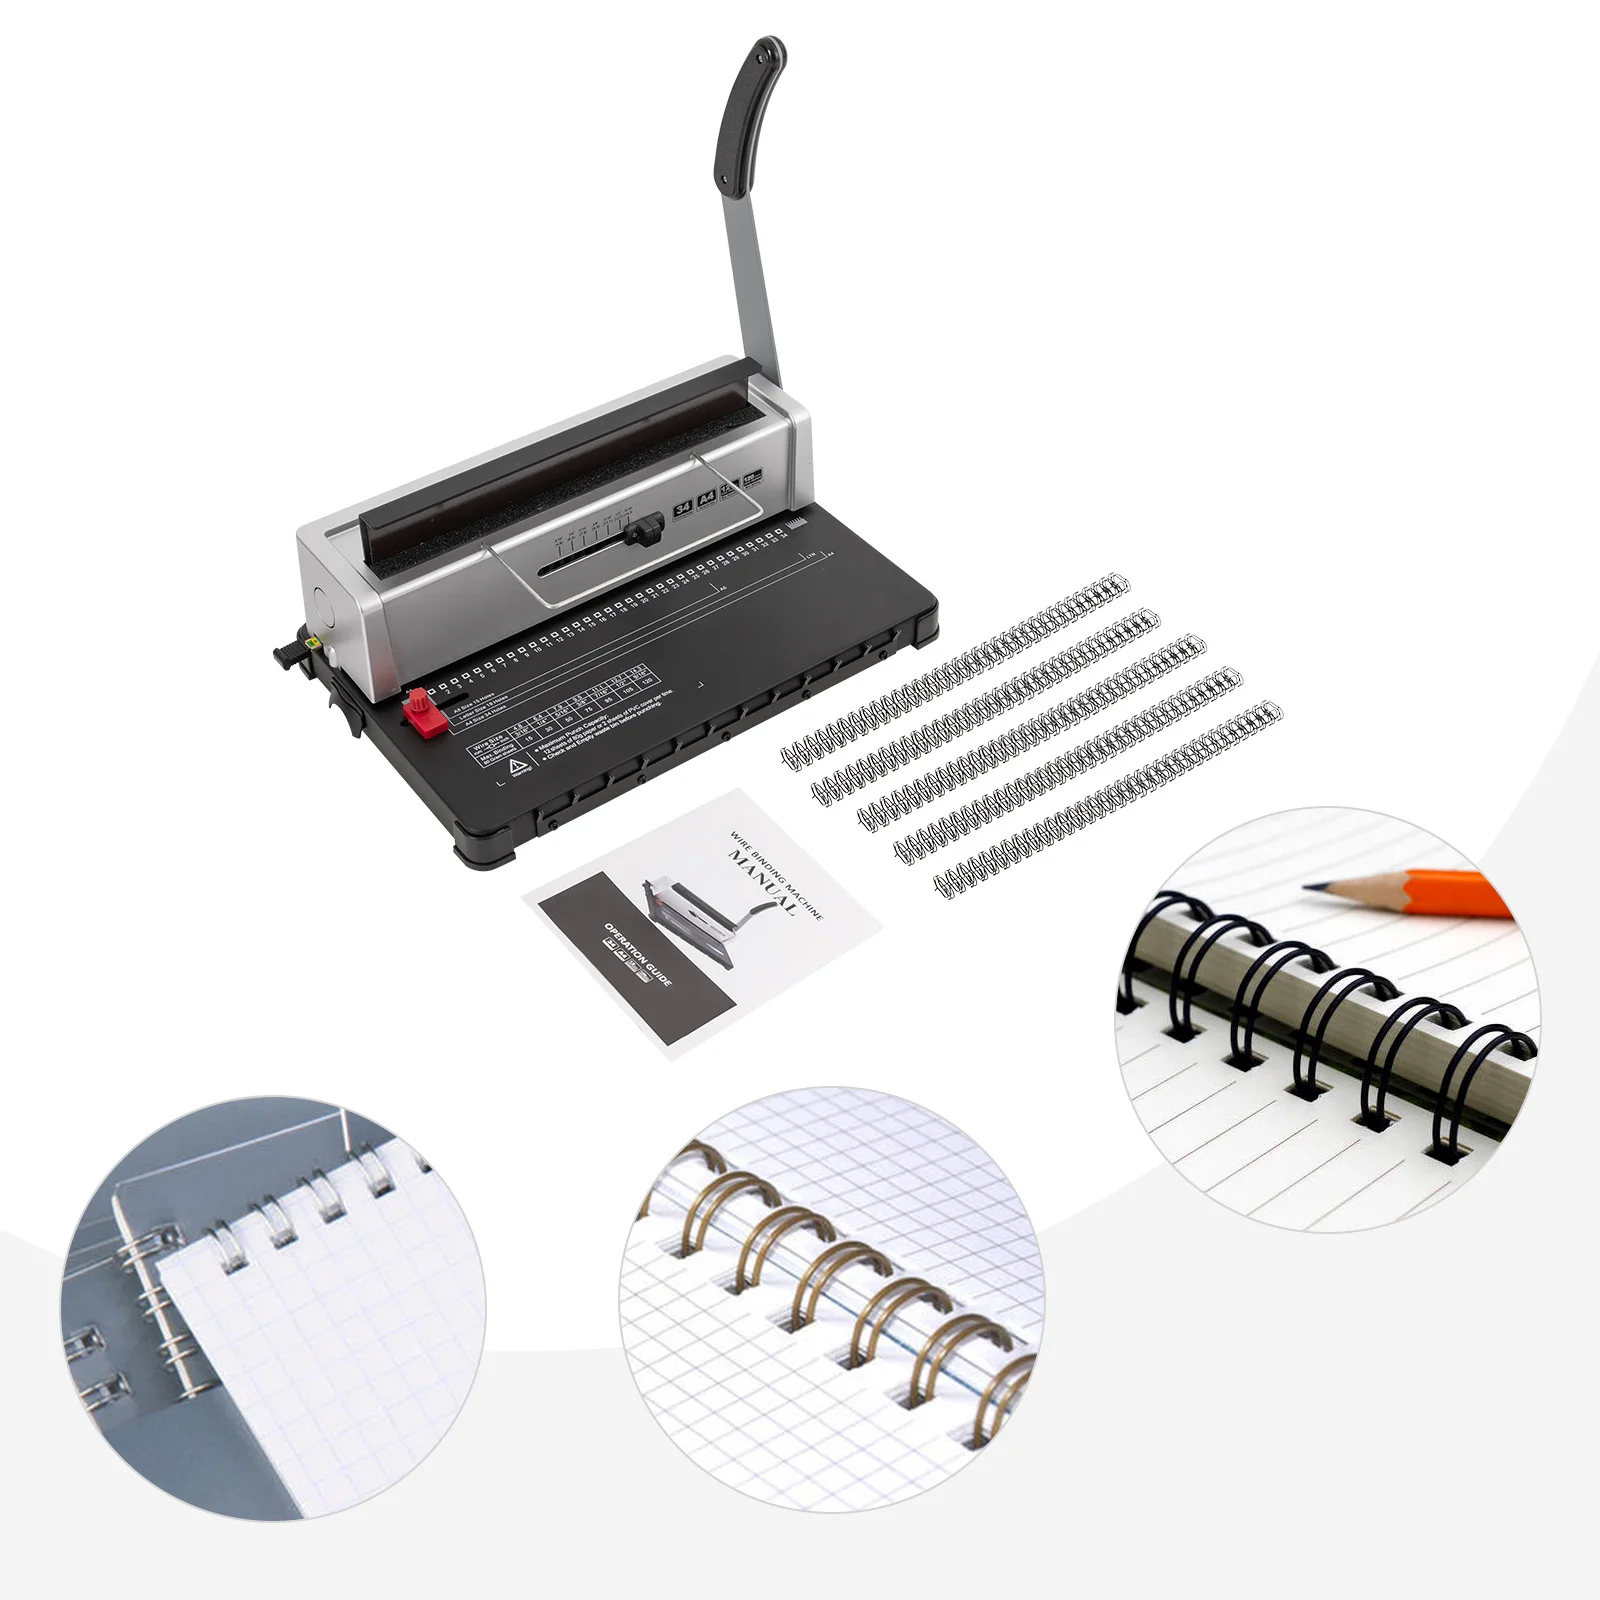 Binding Machine, Wire Binder Machine 34 Holes, Punching 12 Sheets, Bind 120 Sheets with Sturdy Metal Construction Comes